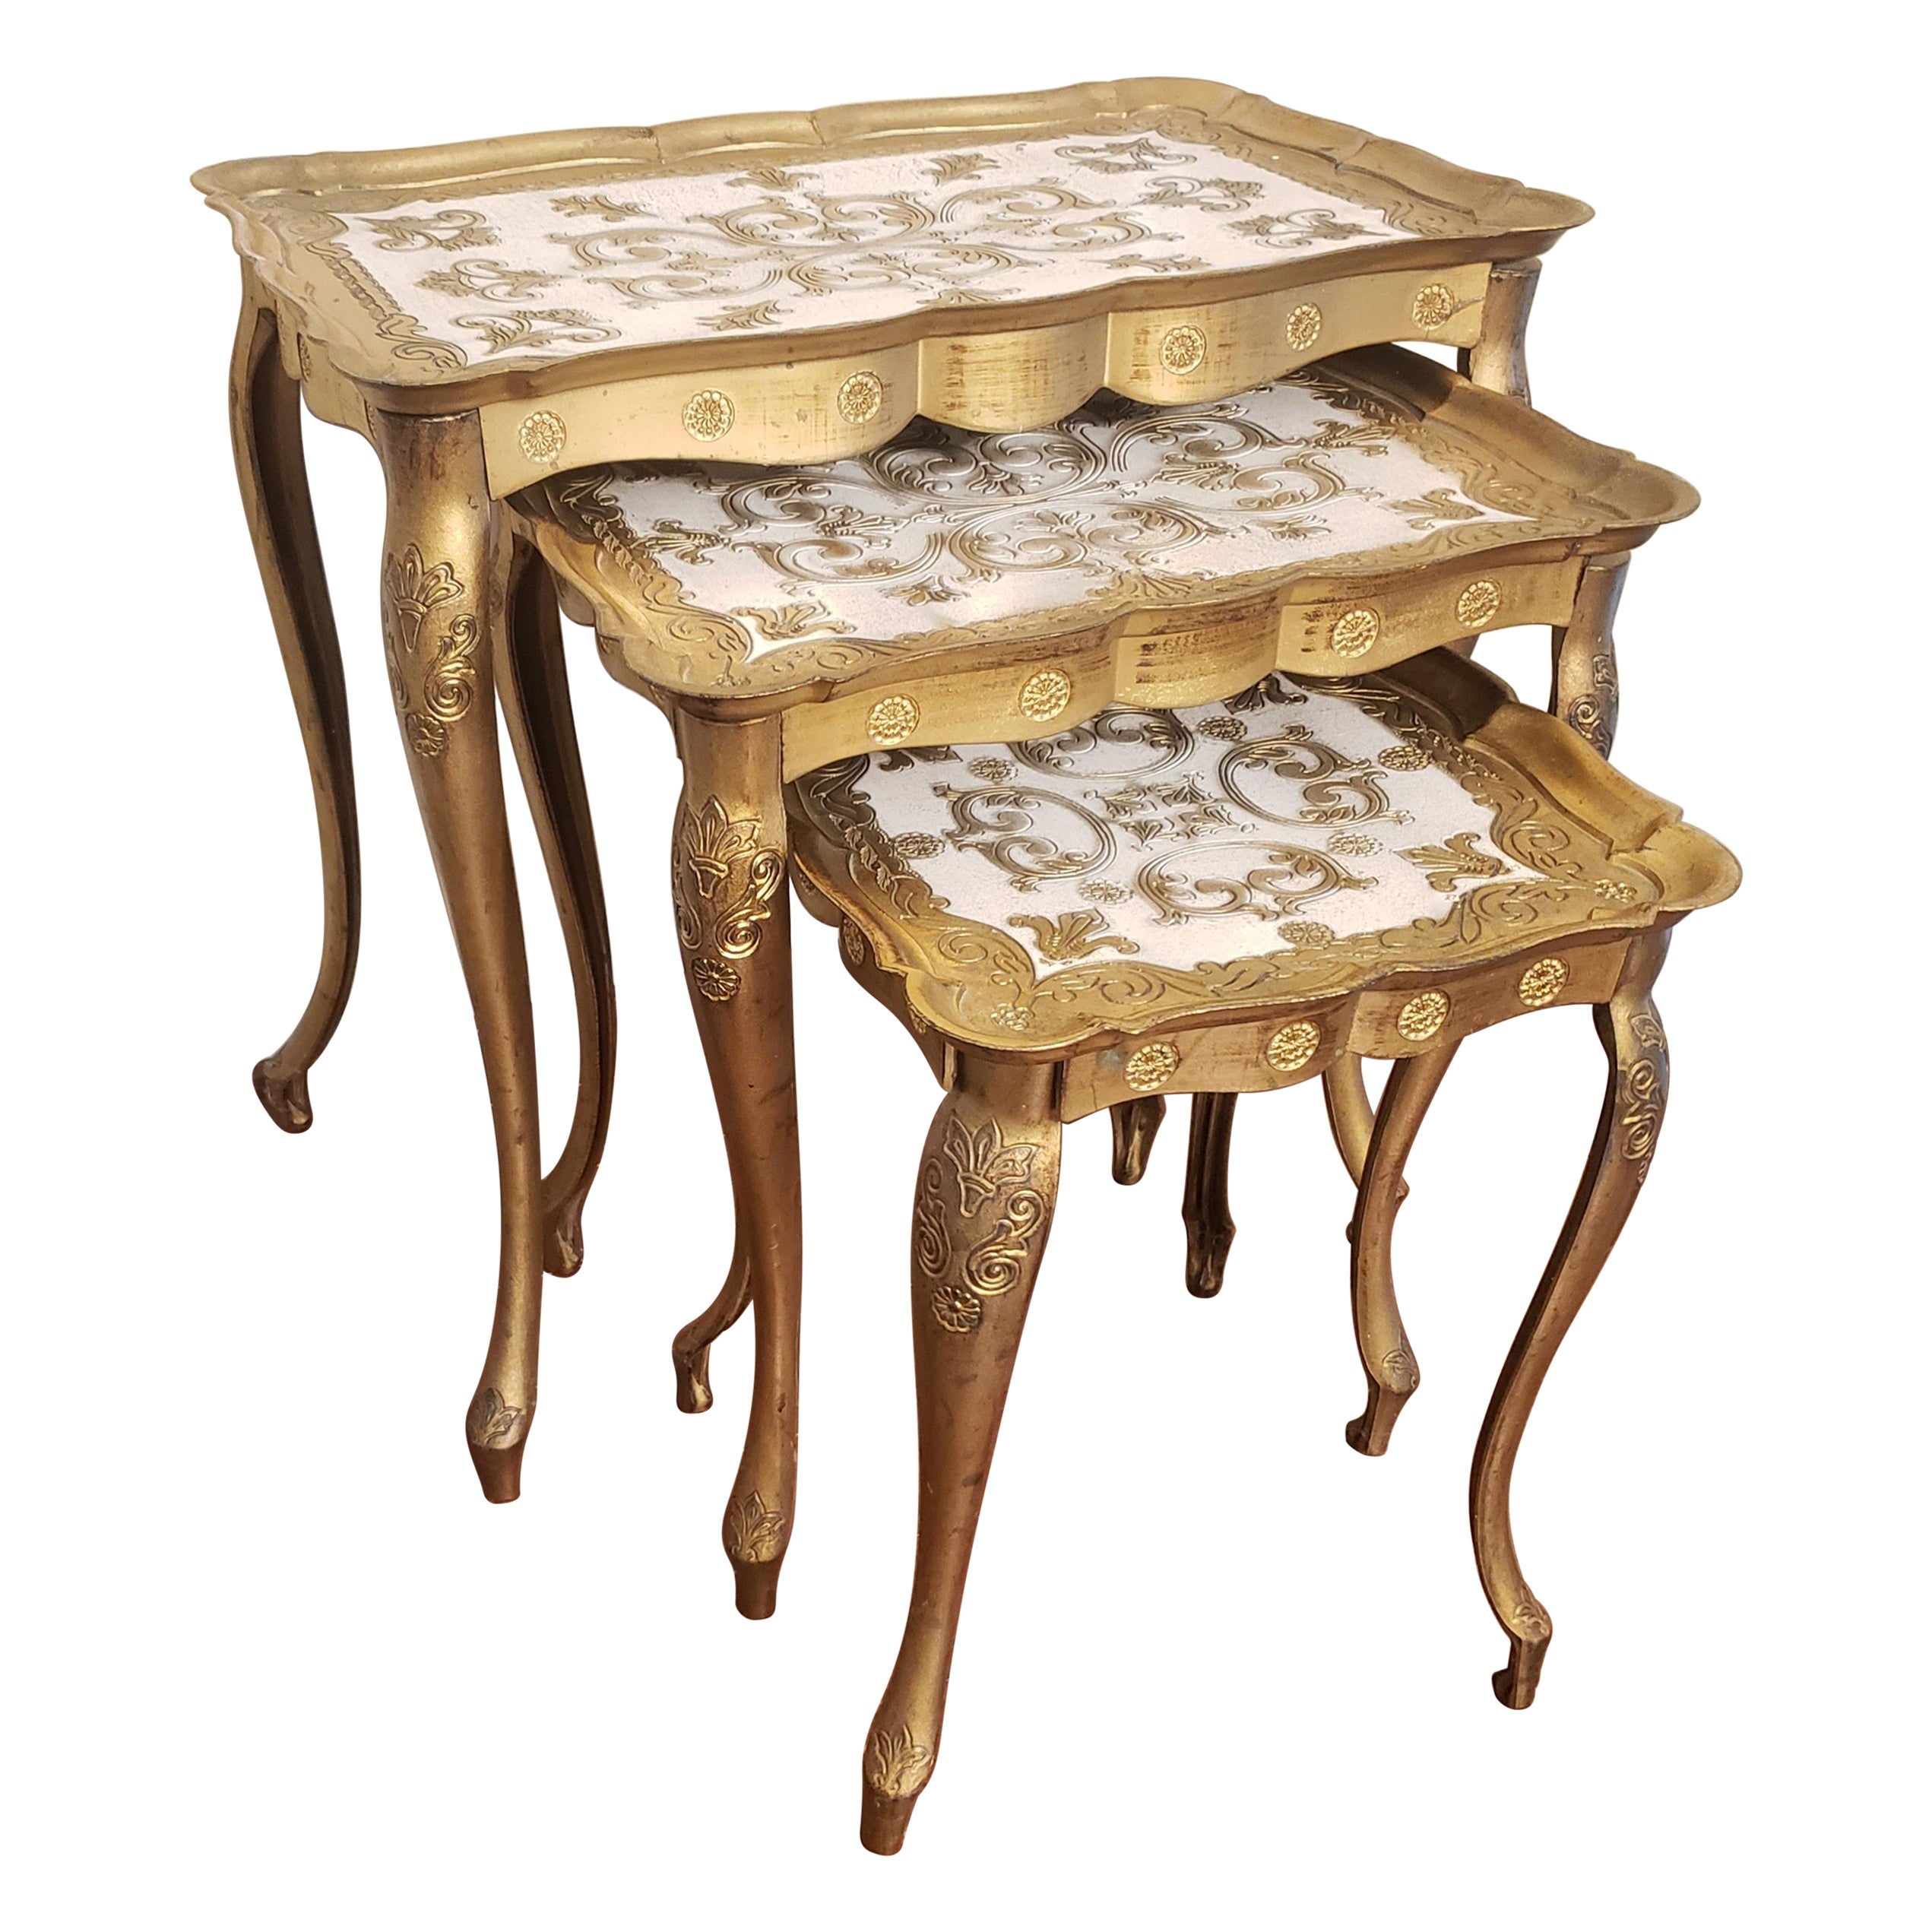 1950s Italian Florentine Gilted Nesting Tables, a Set